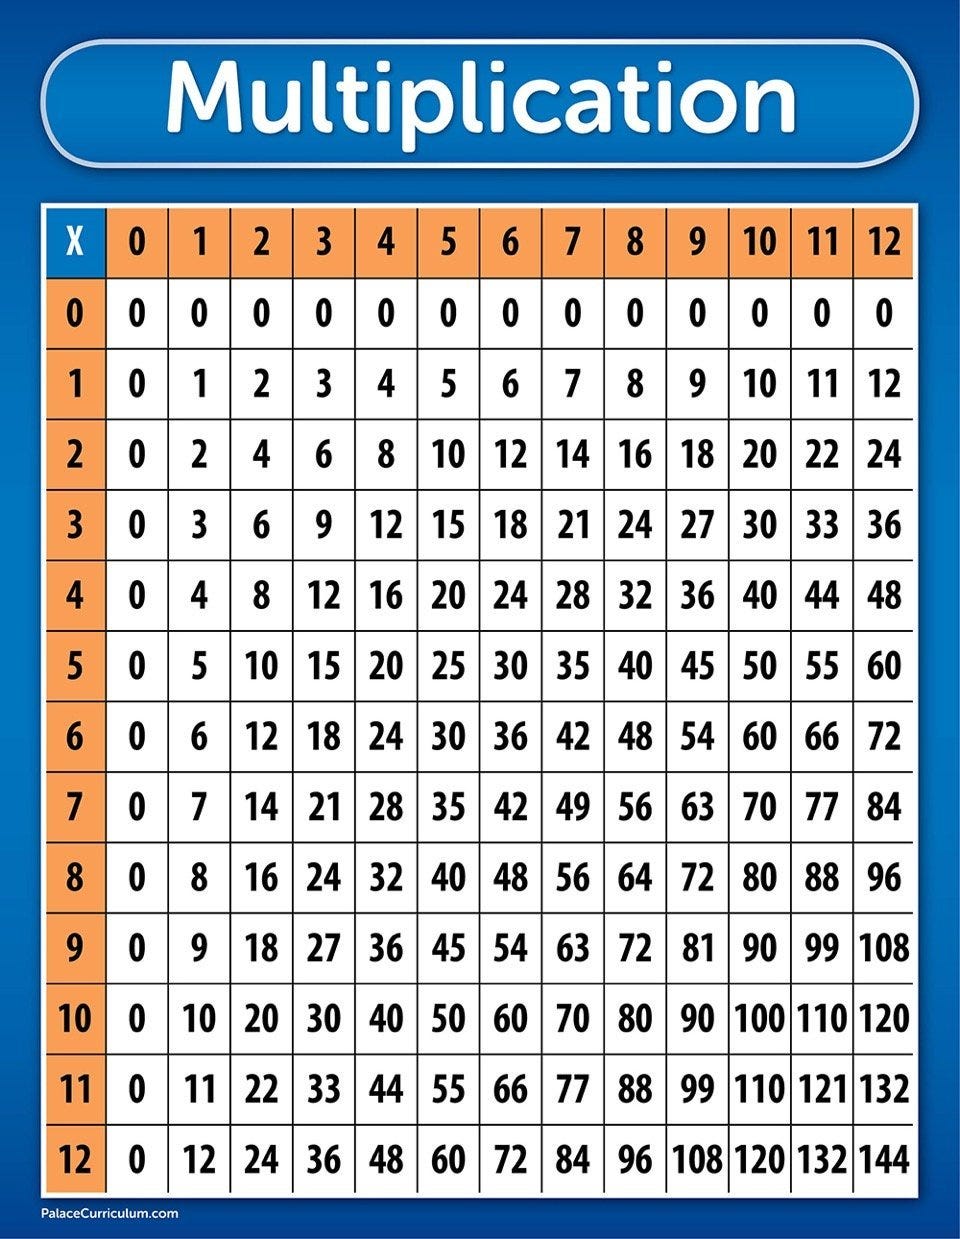 a new style of multiplication tables | by Dave | It's Your Turn